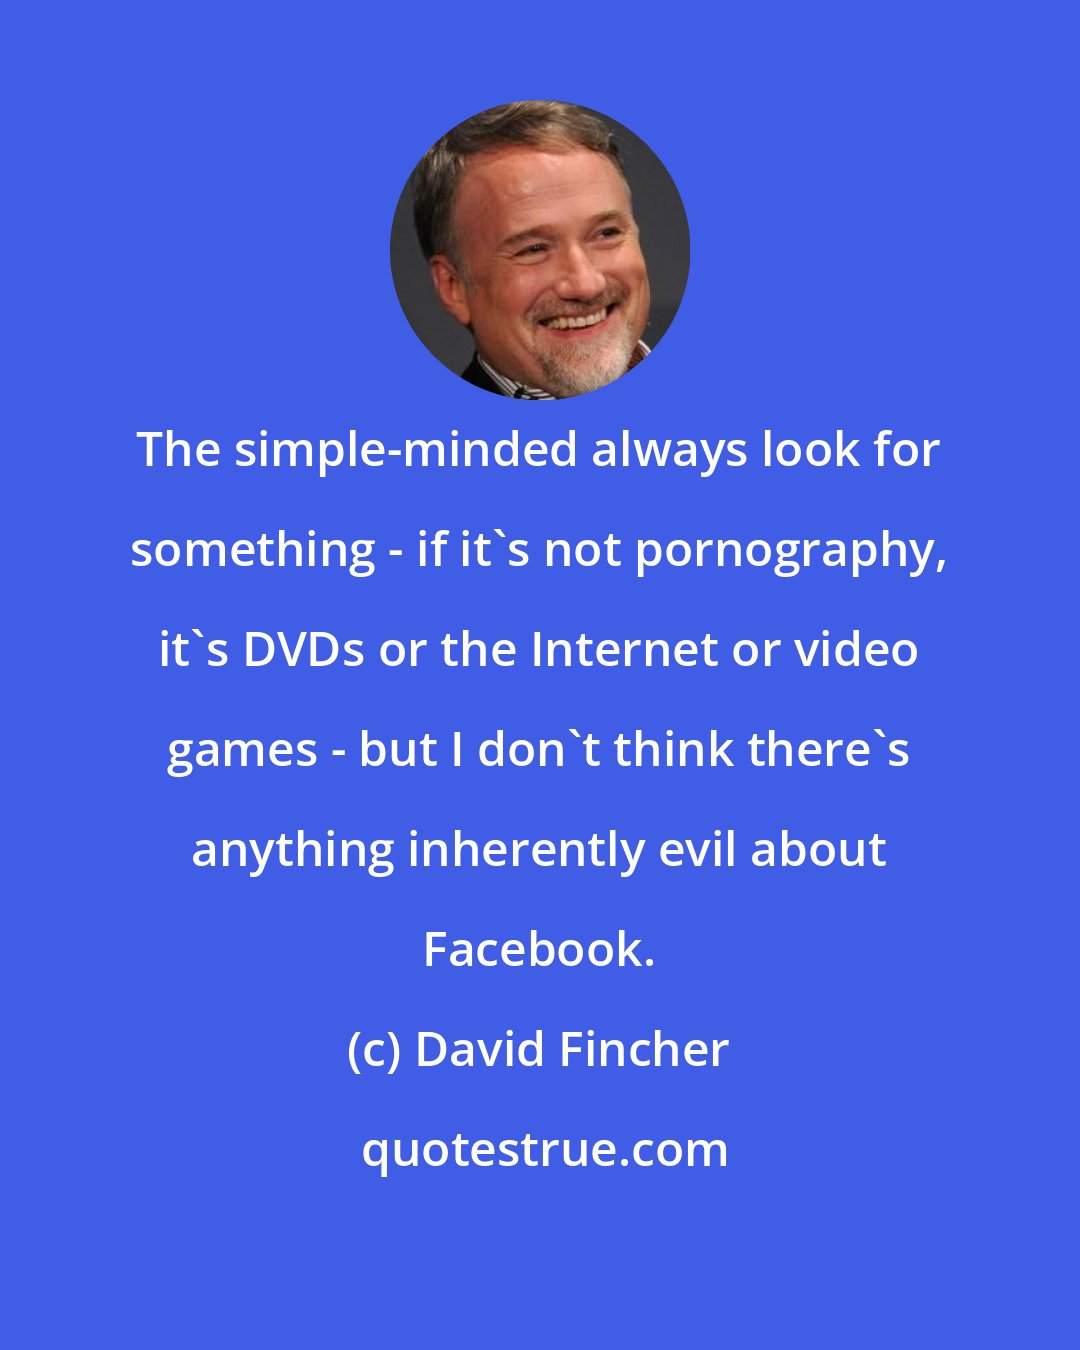 David Fincher: The simple-minded always look for something - if it's not pornography, it's DVDs or the Internet or video games - but I don't think there's anything inherently evil about Facebook.